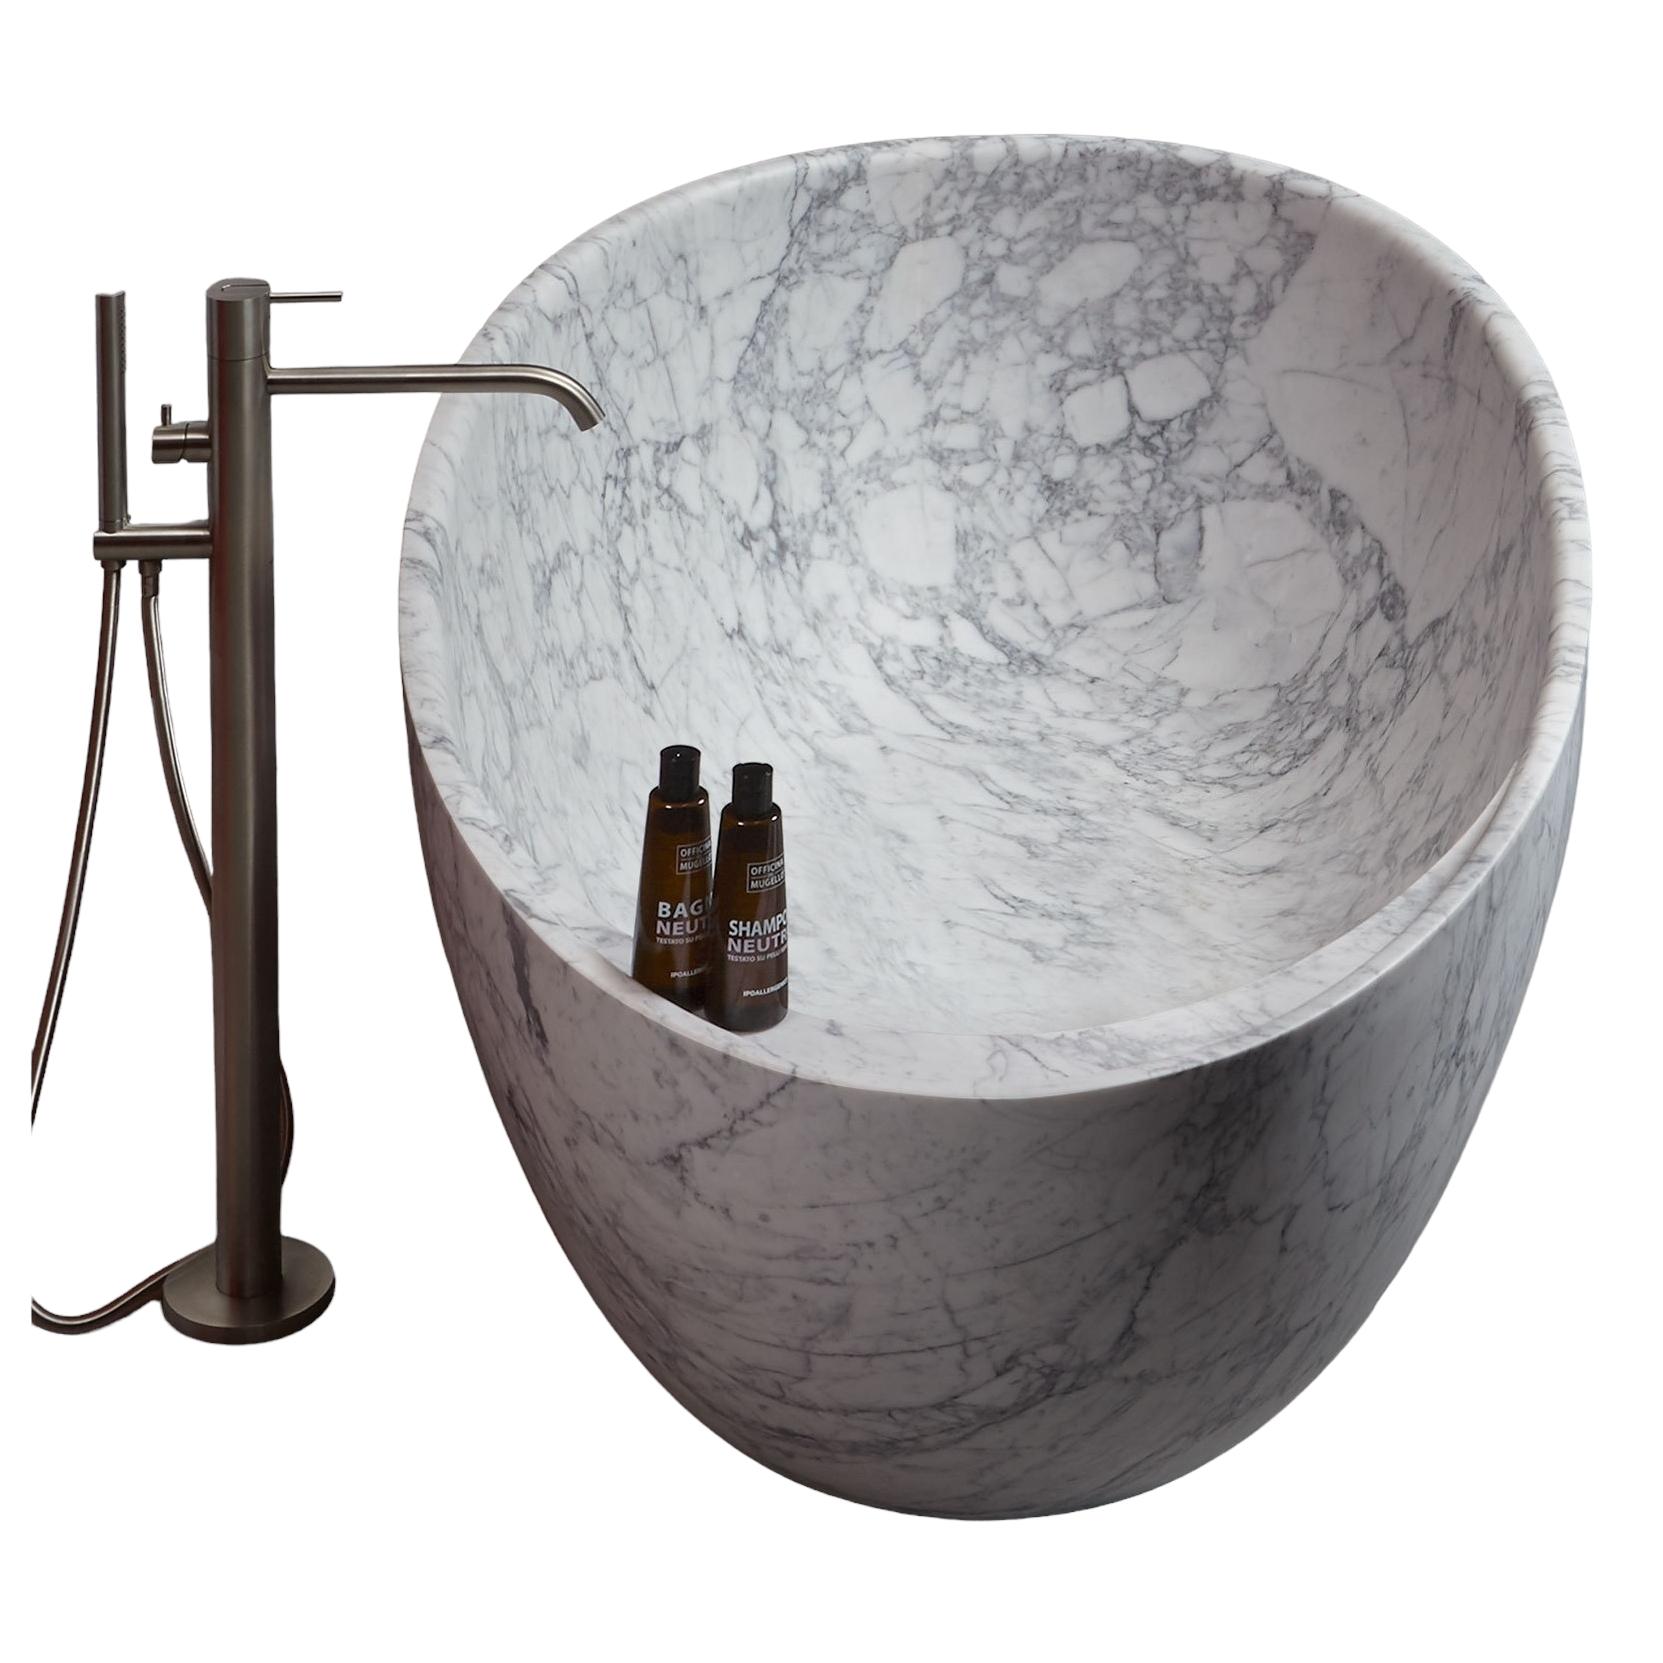 Solid one piece manufacture with a shelf incorporated, made from Carrara Bianco Marble, the oval shape offering excellent design proportions with the comfort of the naturally honed marble surface.

Various other marbles available with custom sizing